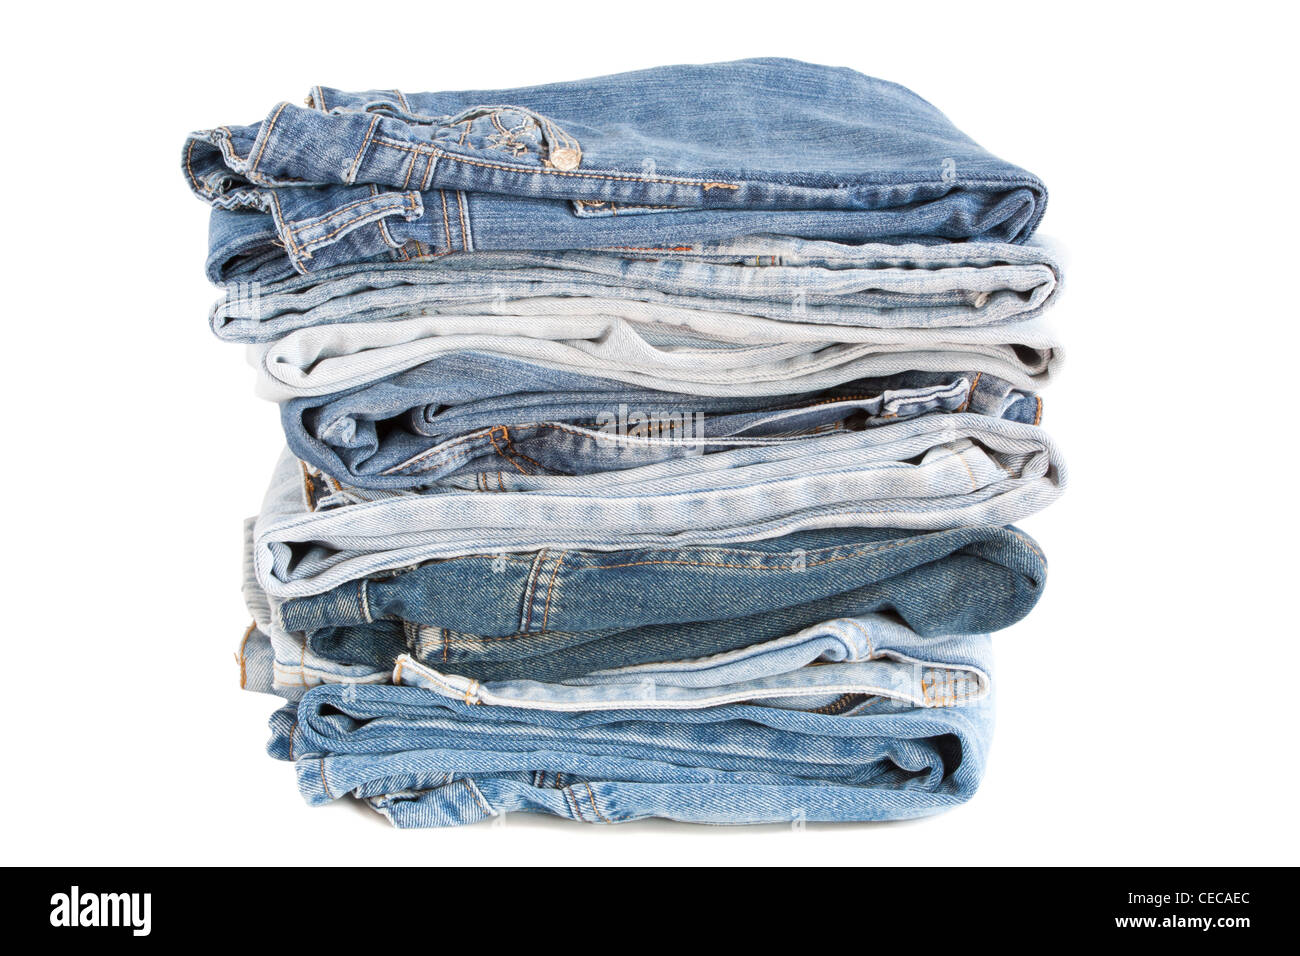 Some pairs of blue jeans stacked over a white background. Stock Photo